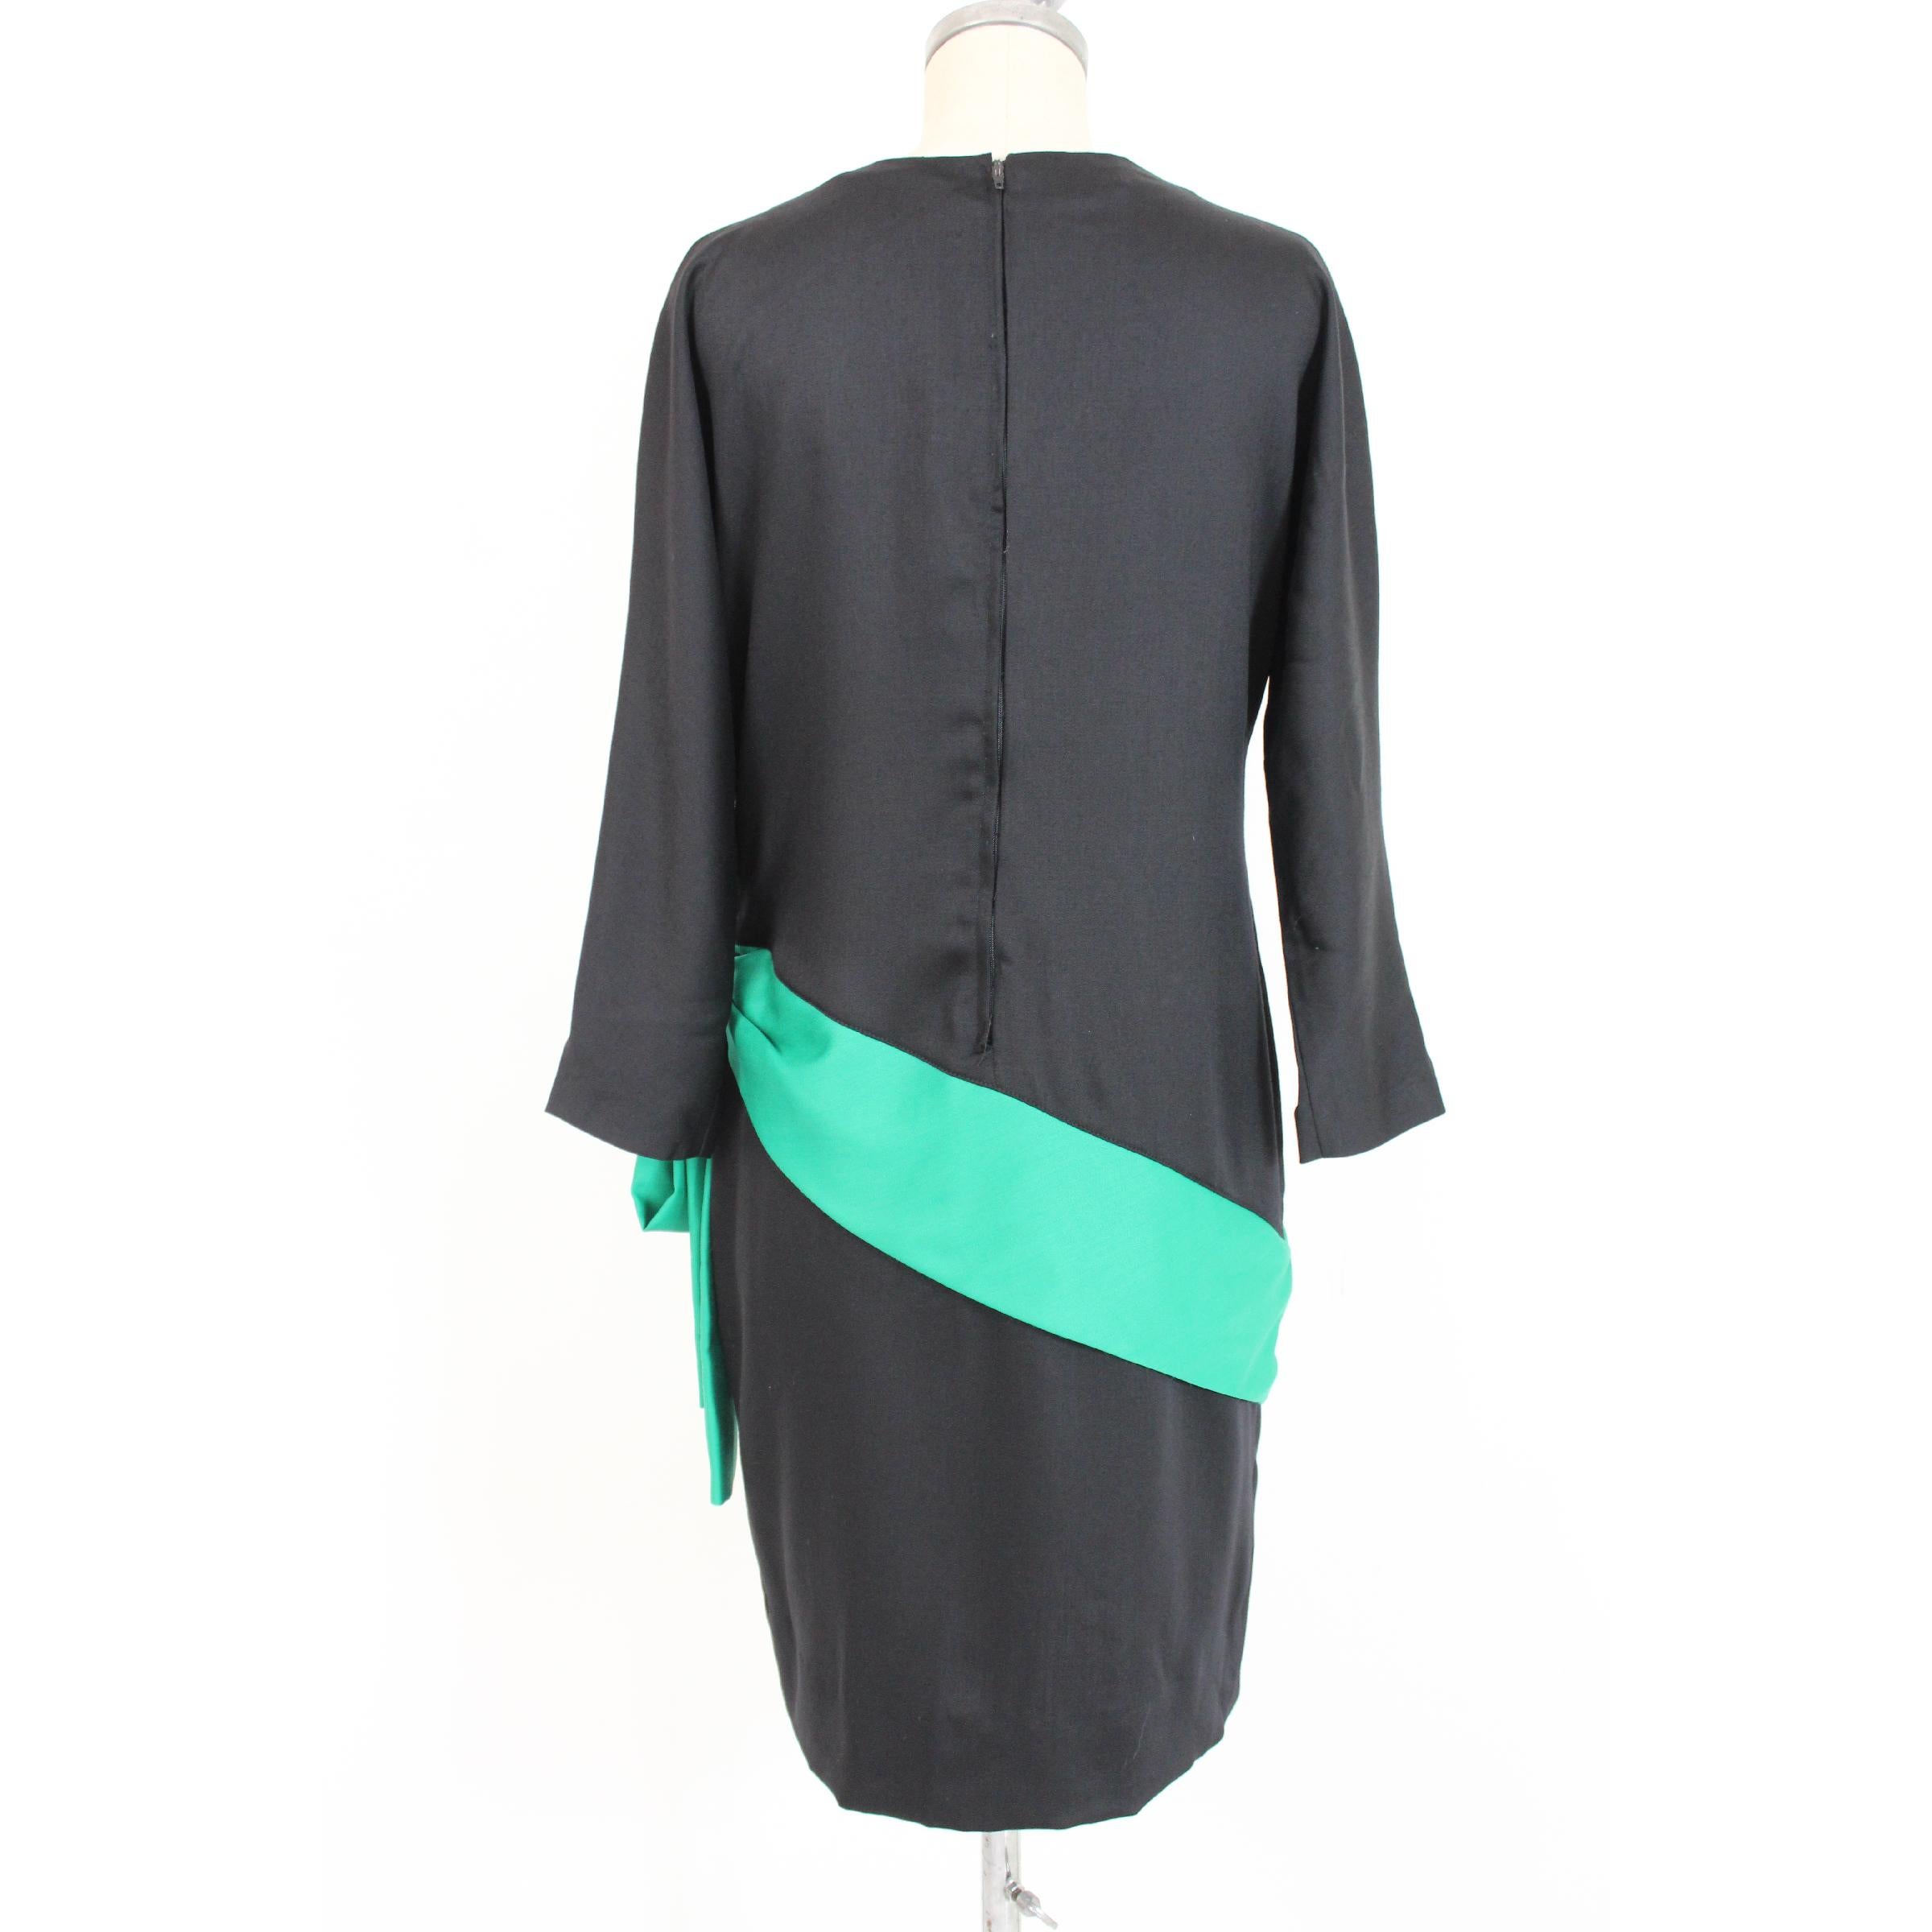 Adriana Kastern vintage 80s evening dress. 100% wool, black with a green waist bow, knee length, crew neck and 3/4 sleeves. Made in Italy. Excellent vintage condition. 

Size: 46 It 12 Us 14 Uk 

Shoulder: 46 cm 
Bust/Chest: 51 cm 
Sleeve: 45 cm